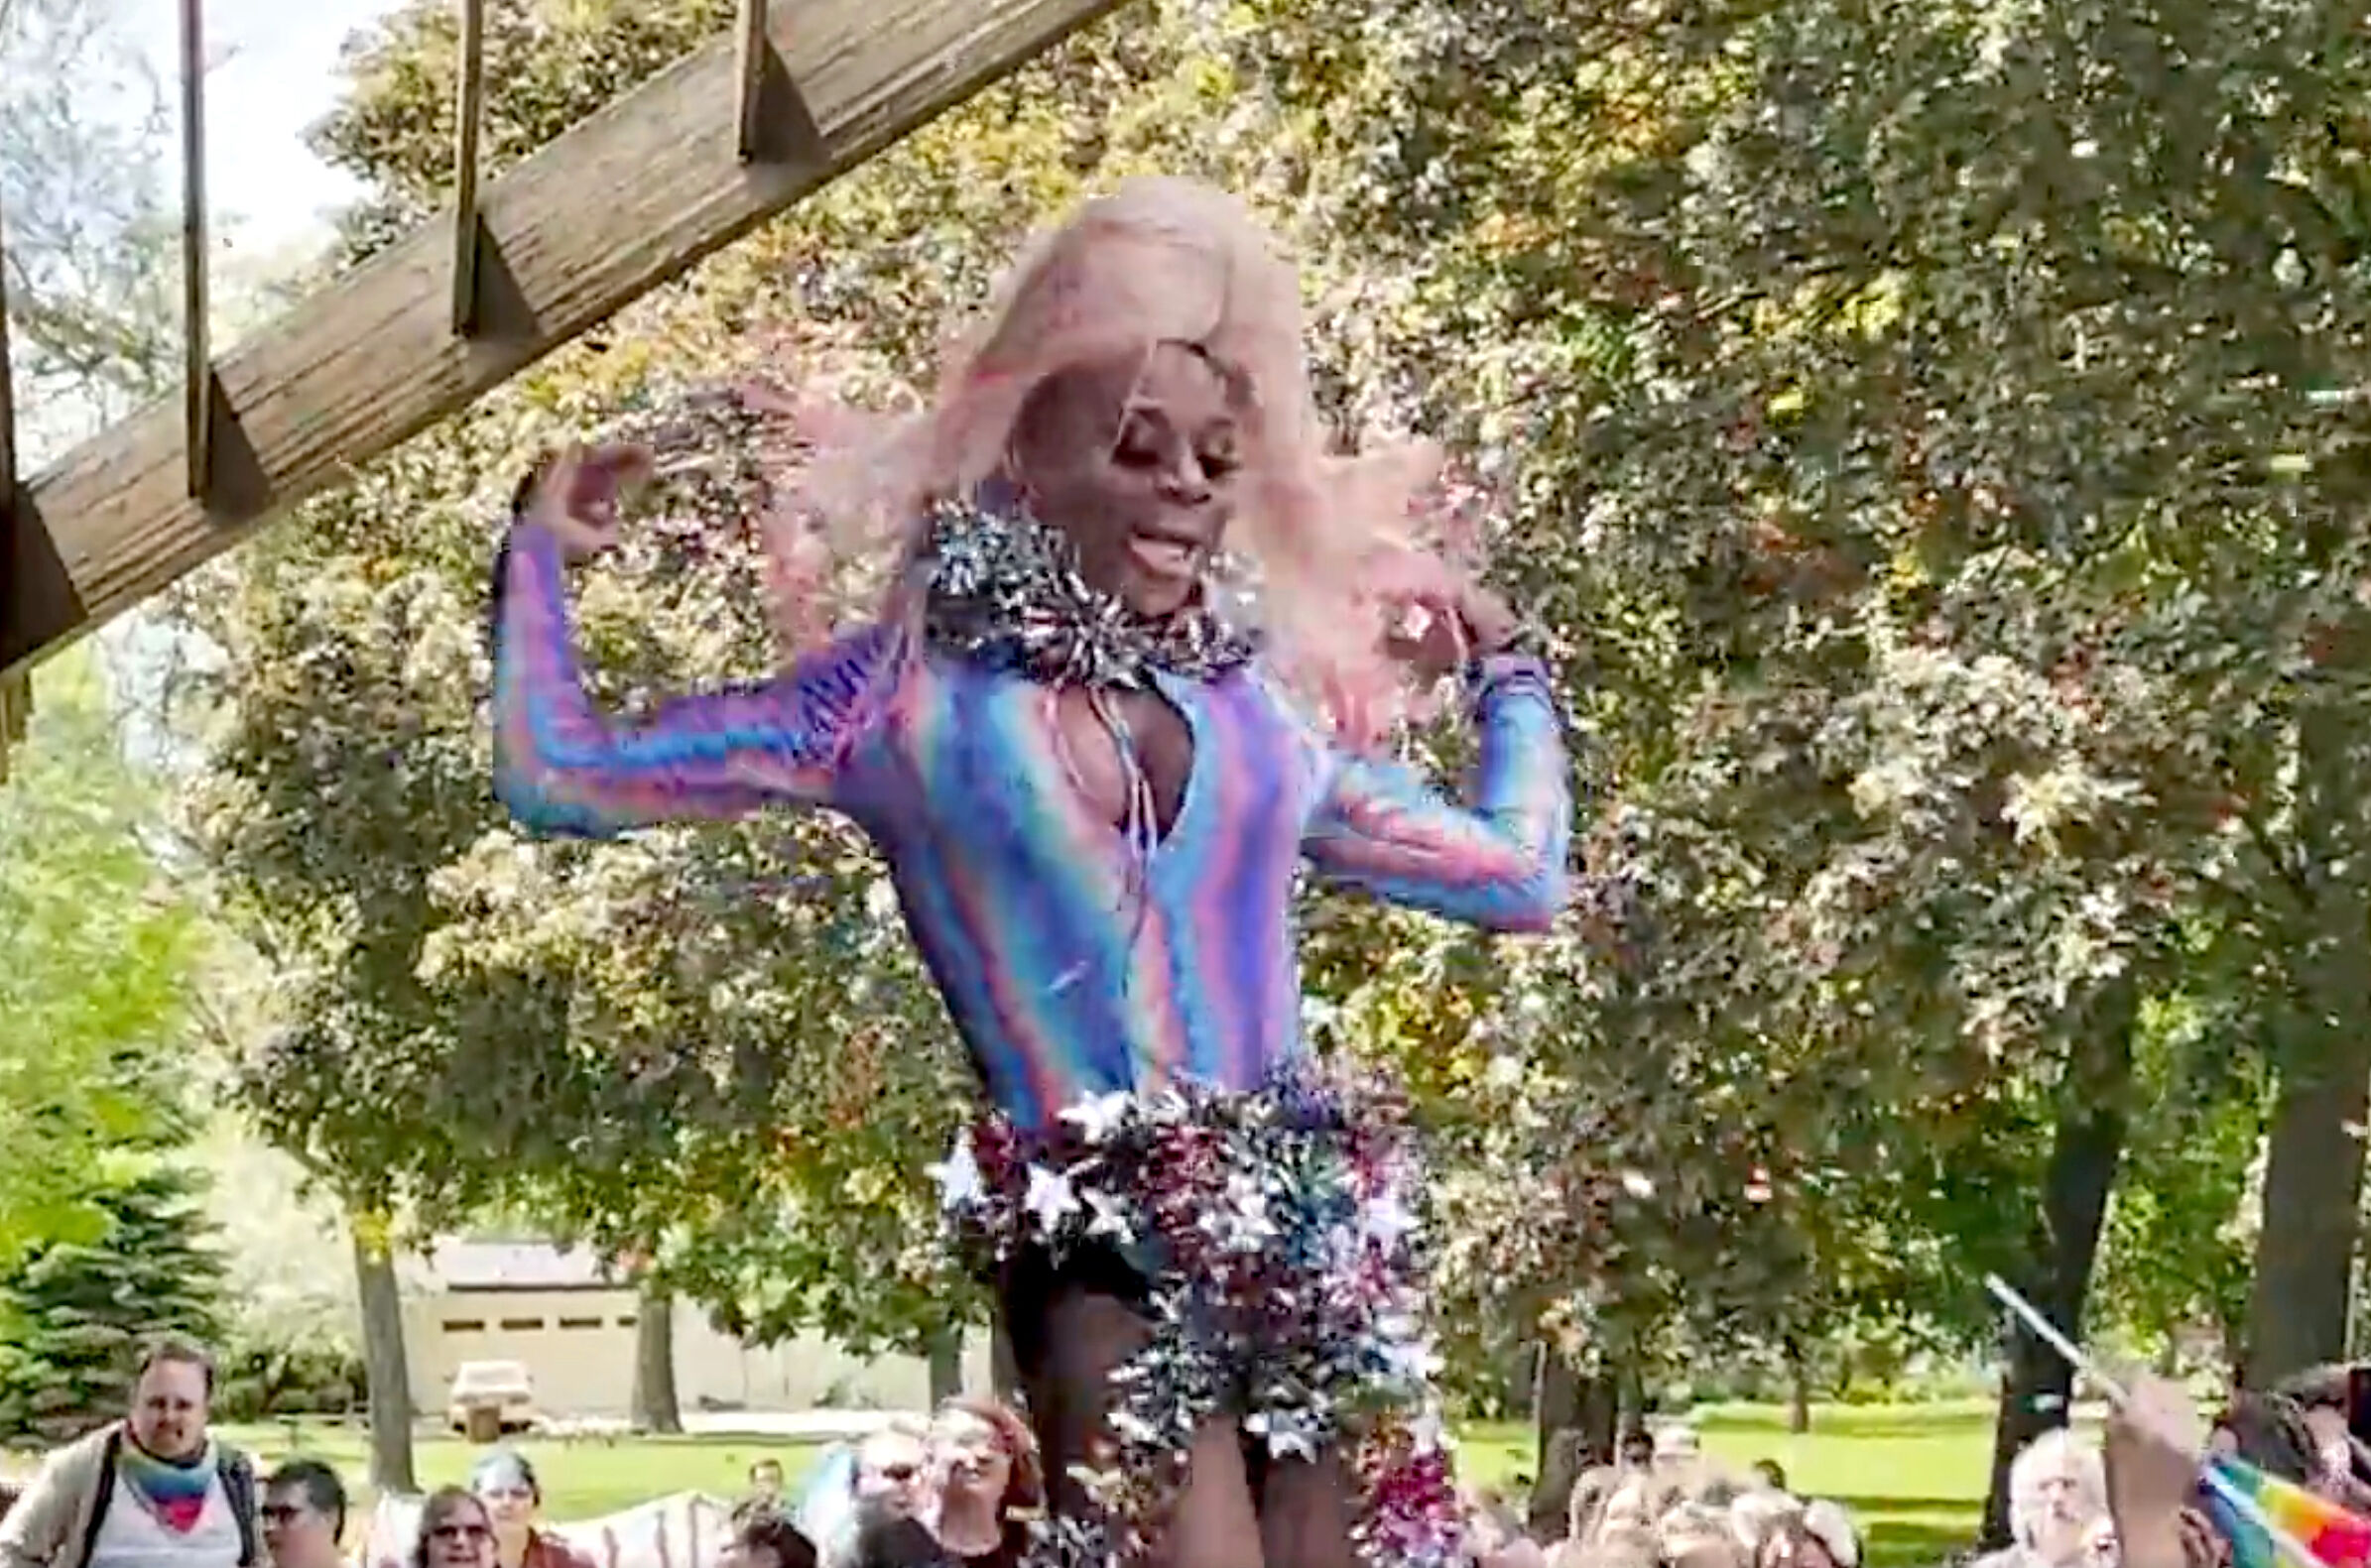 Mona Liza Million performing at Coeur d’Alene's Pride in the Park event